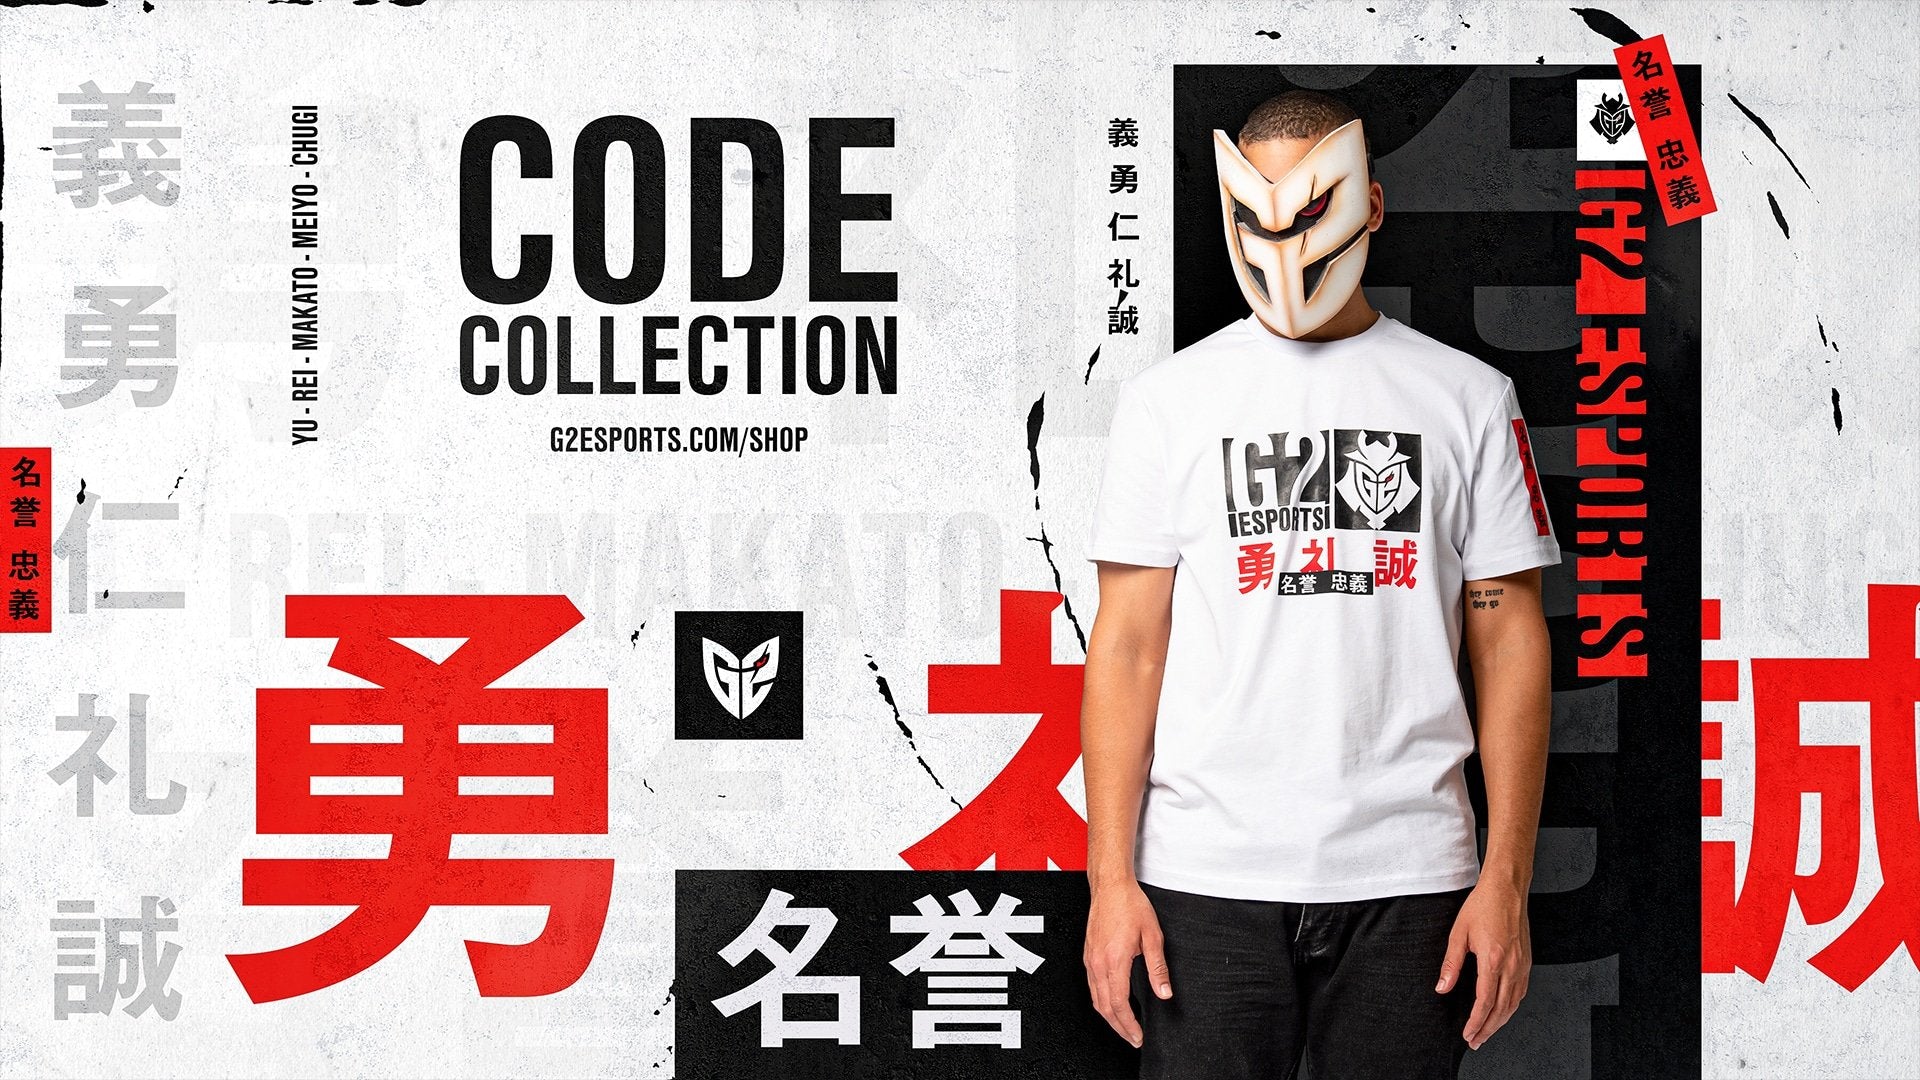 CODE COLLECTION WALLPAPER PACK